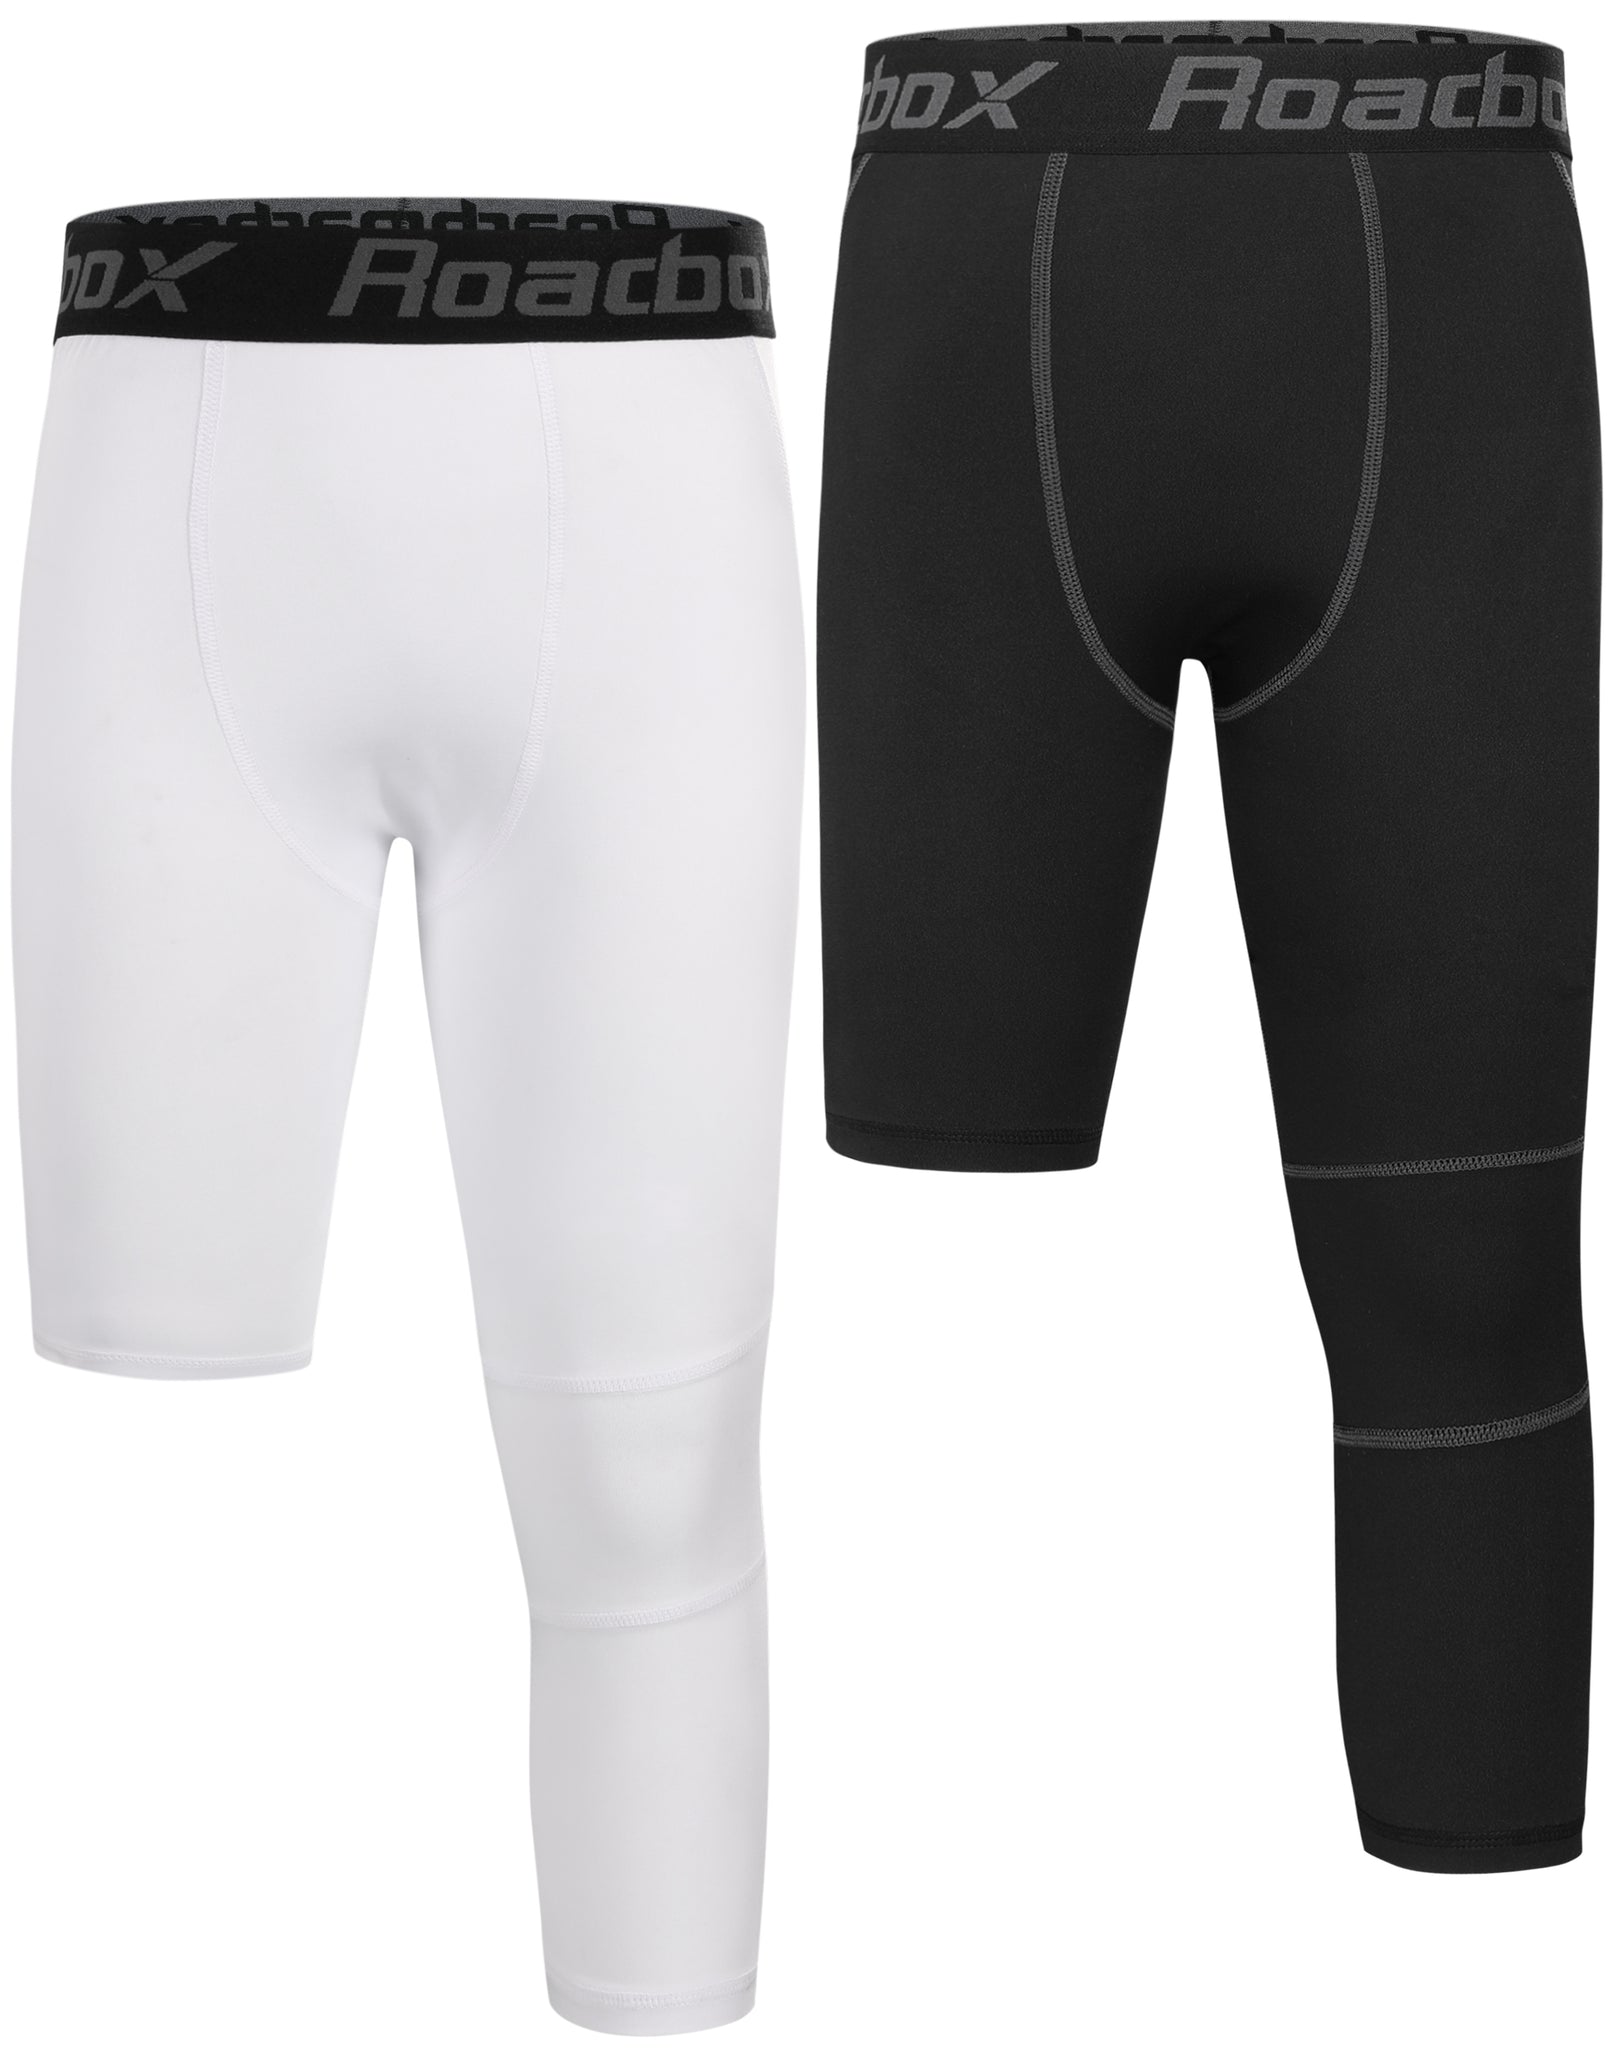 Roadbox Boys One Leg 3/4 Compression Pants 2 Pack - Basketball Tights for Gym Athletic Base Layer Leggings